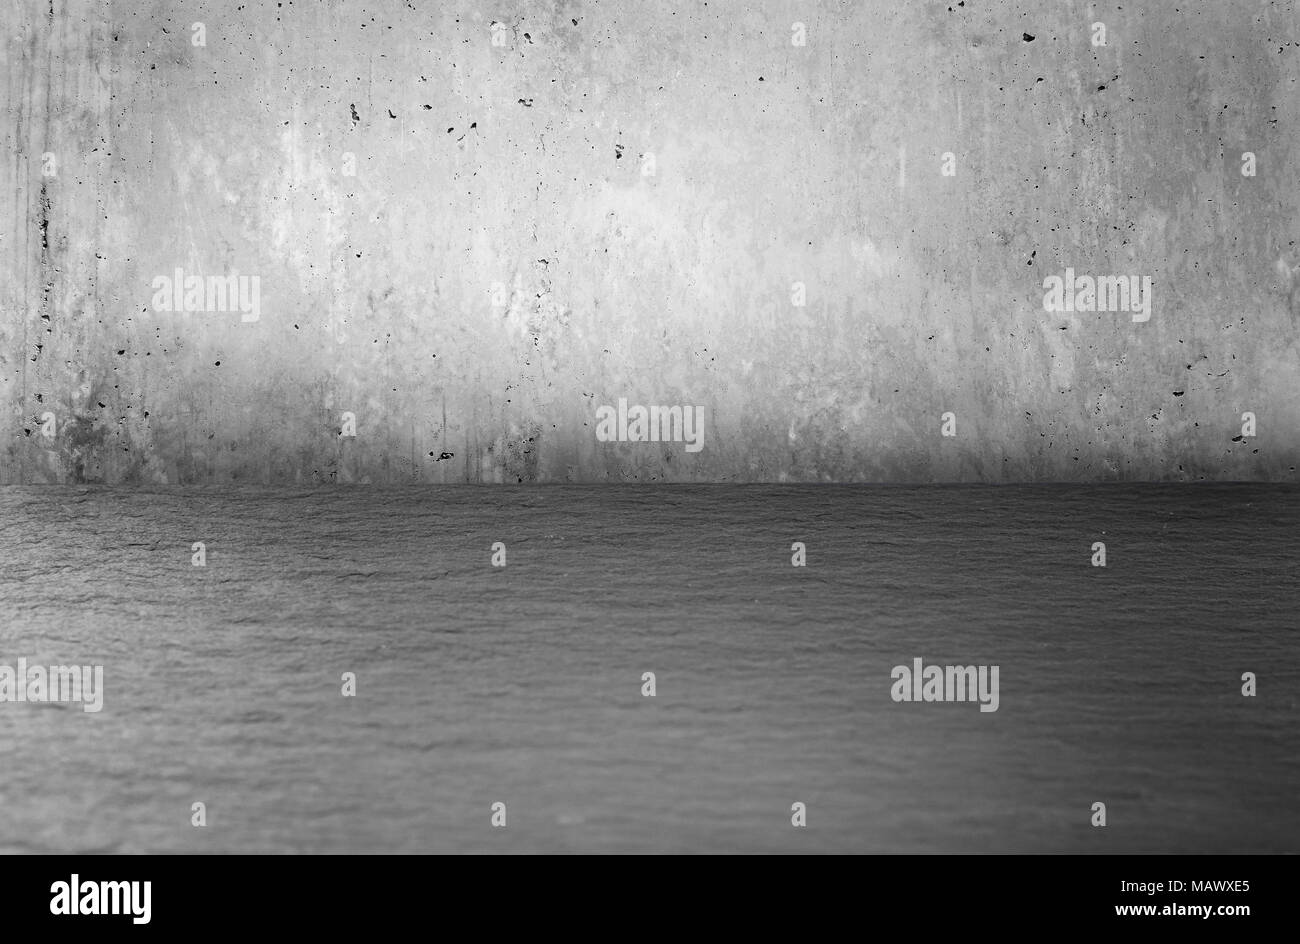 Concrete wall background with copy space. Full frame shot of concrete, textured background or backdrop. Stock Photo